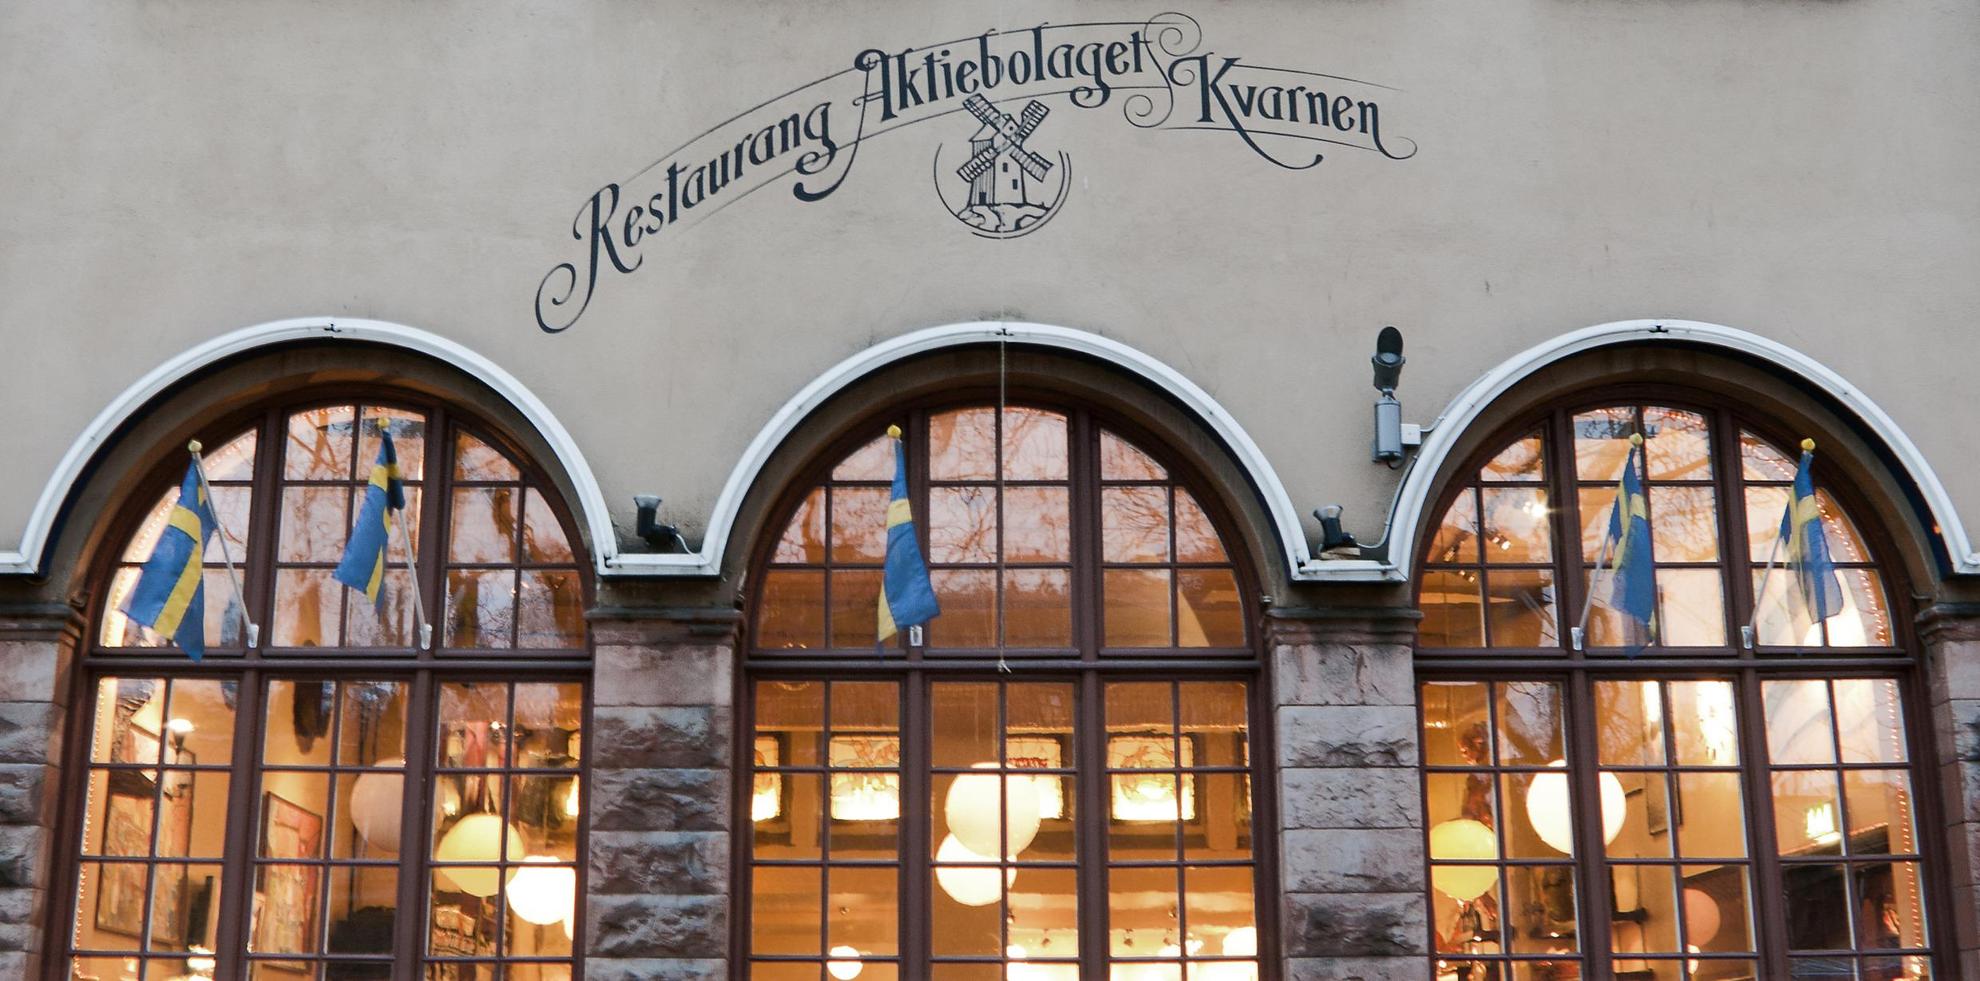 The exterior of restaurant Kvarnen in Stockholm, with domed windows and Swedish flags.